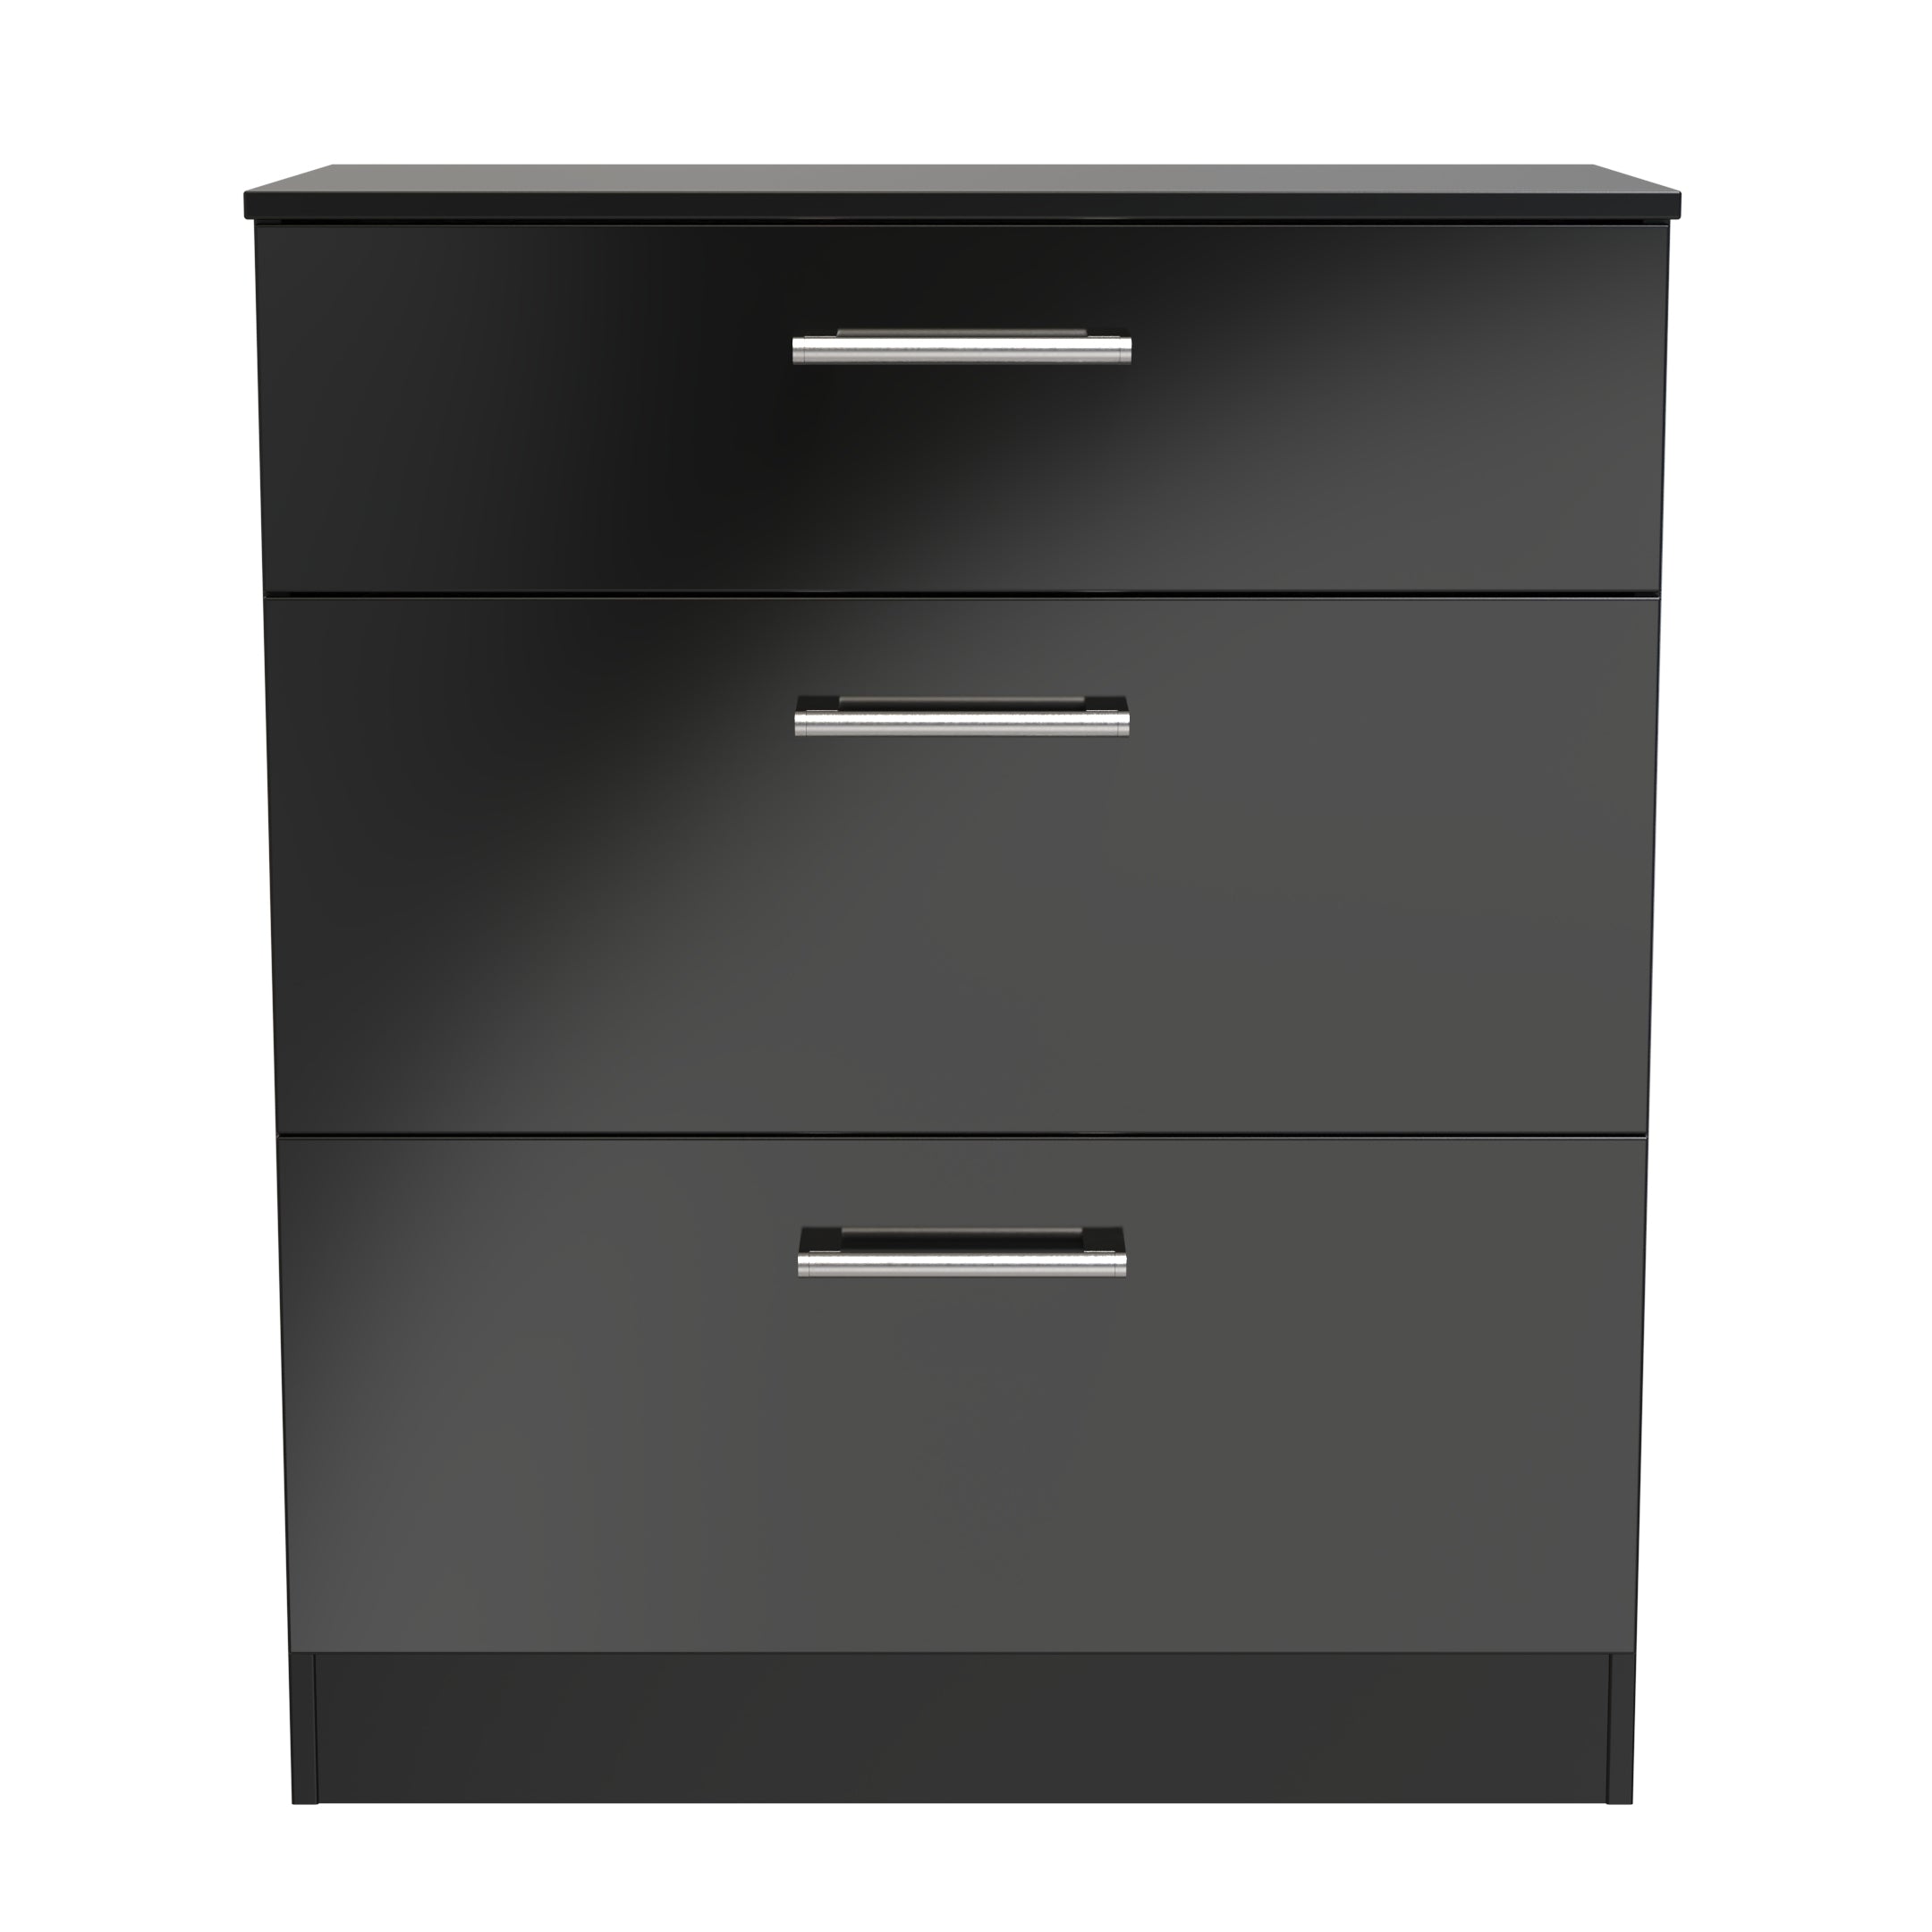 Denver Ready Assembled Chest Of Drawers with 3 Drawers - Black - Lewis’s Home  | TJ Hughes